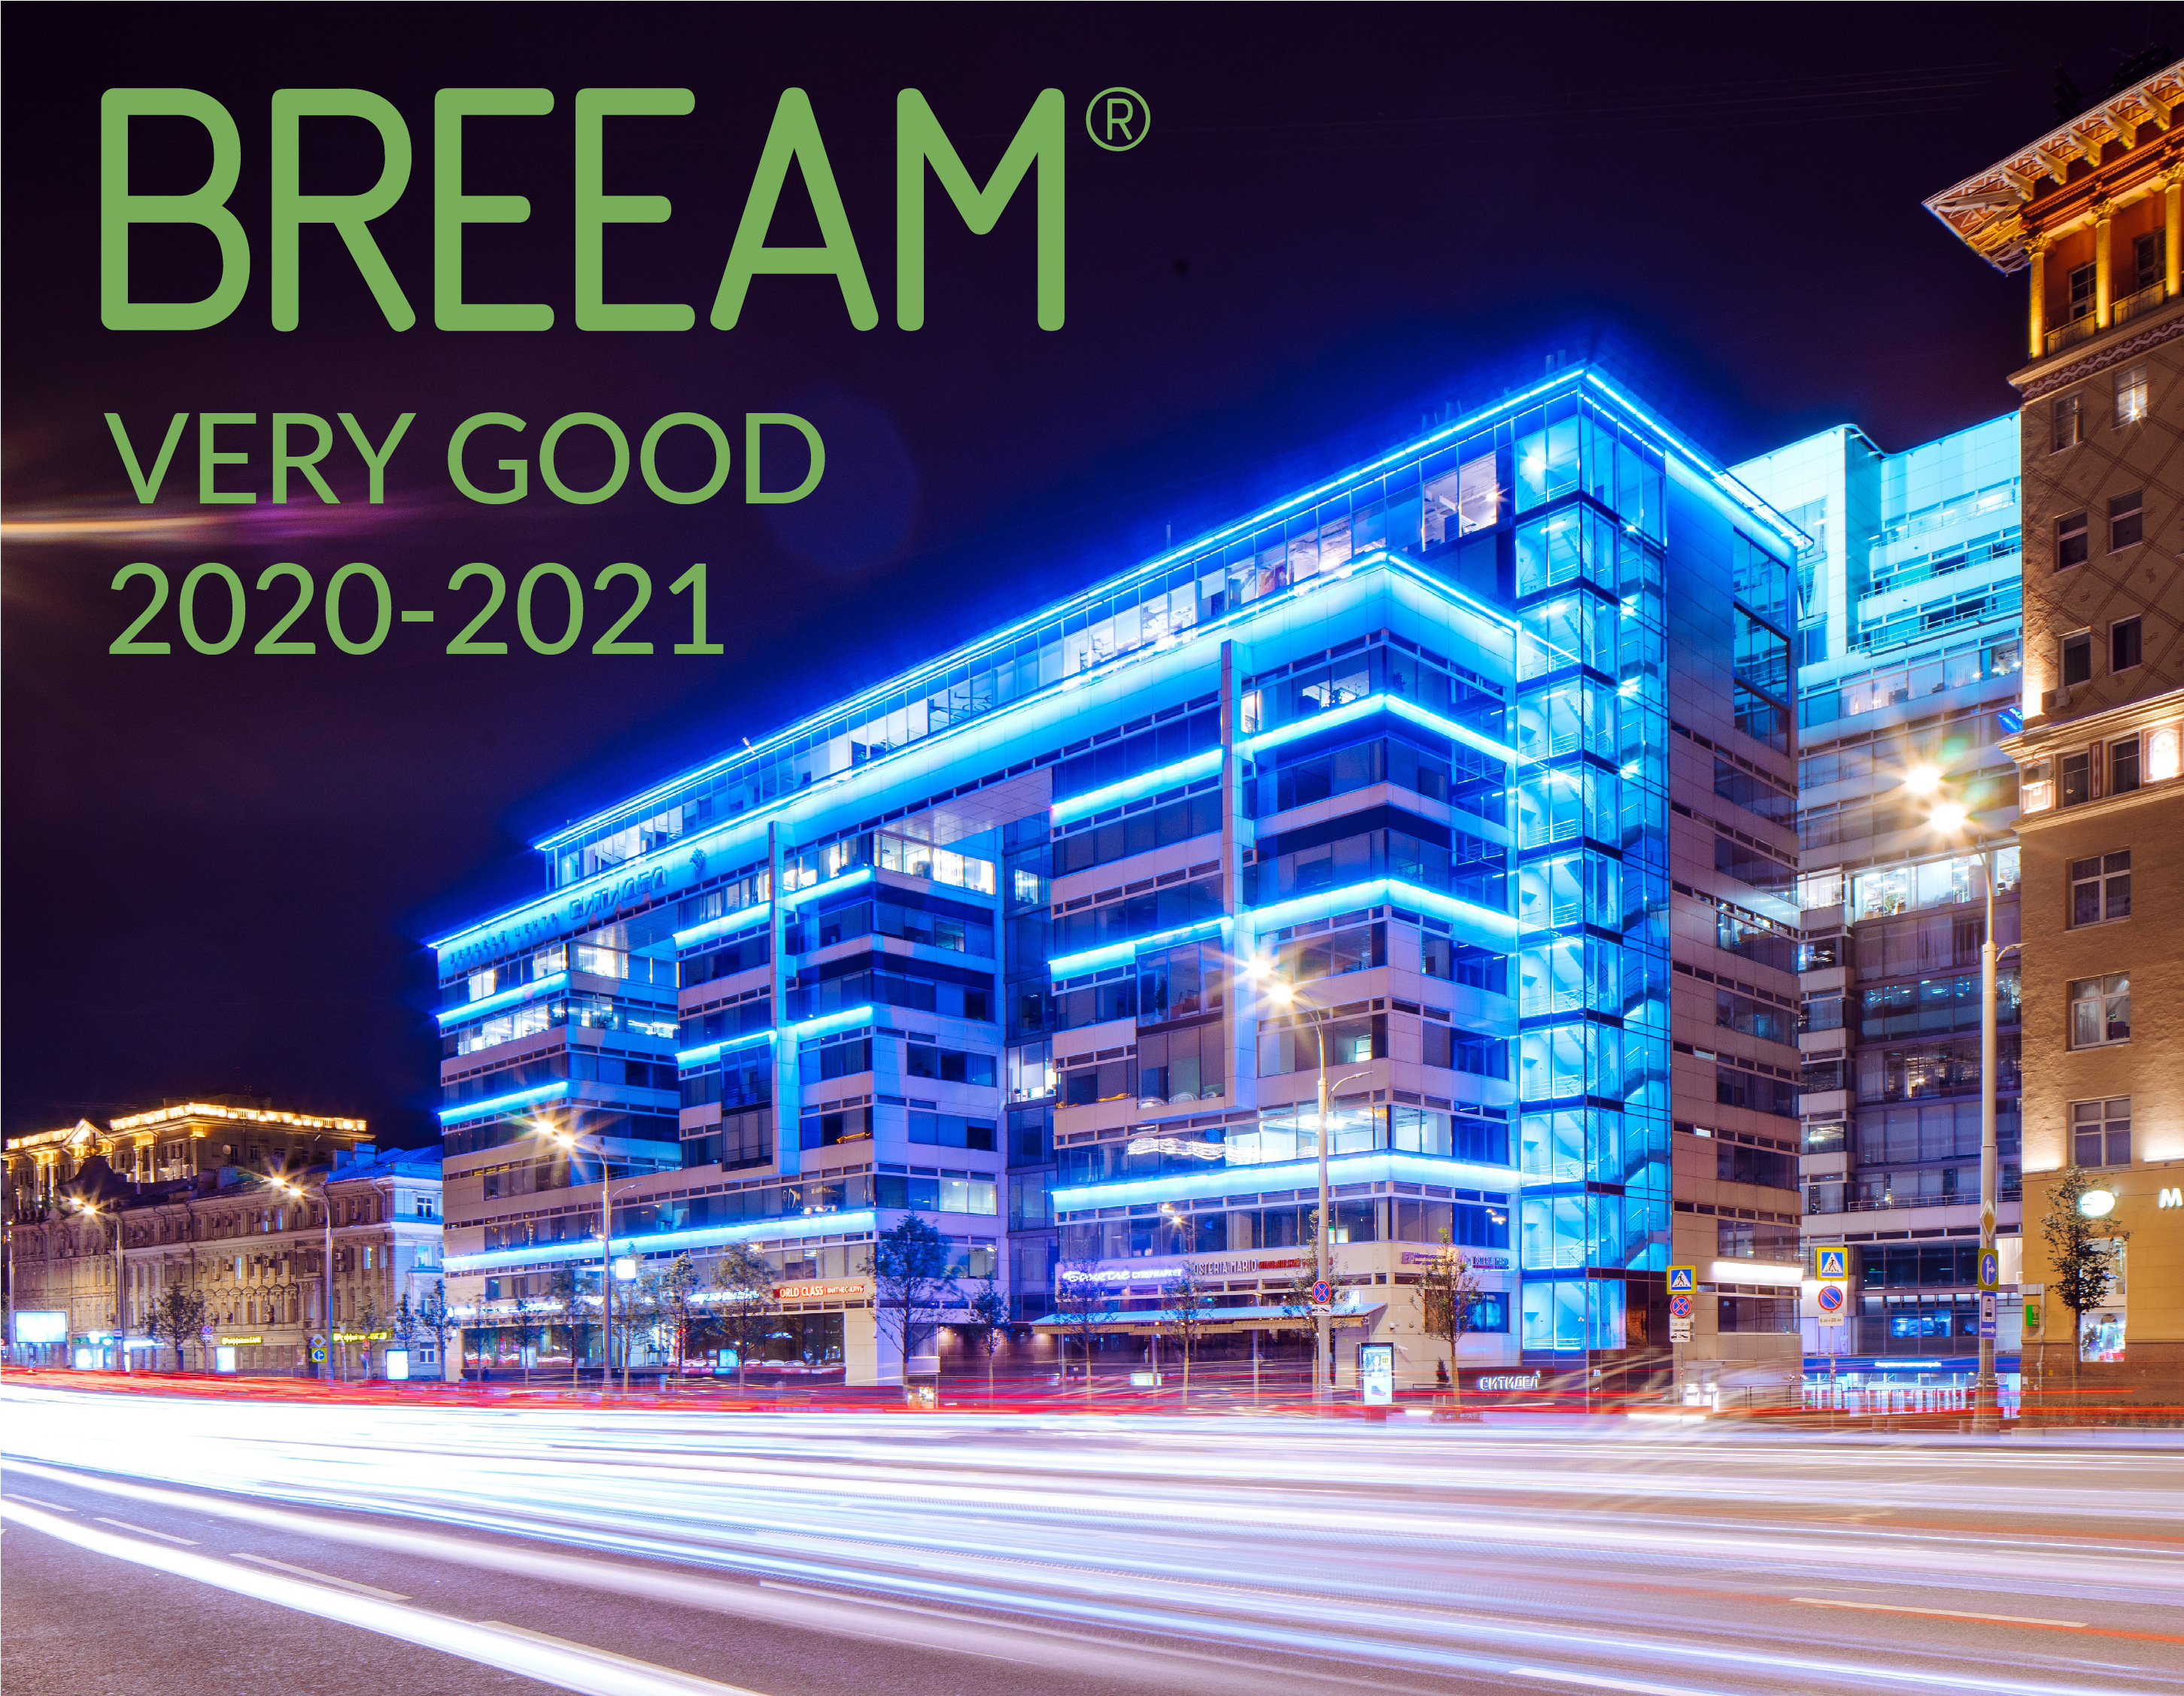 CITYDEL BC has obtained the BREEAM In-Use 2020-2021 certificate with grade “Very Good”